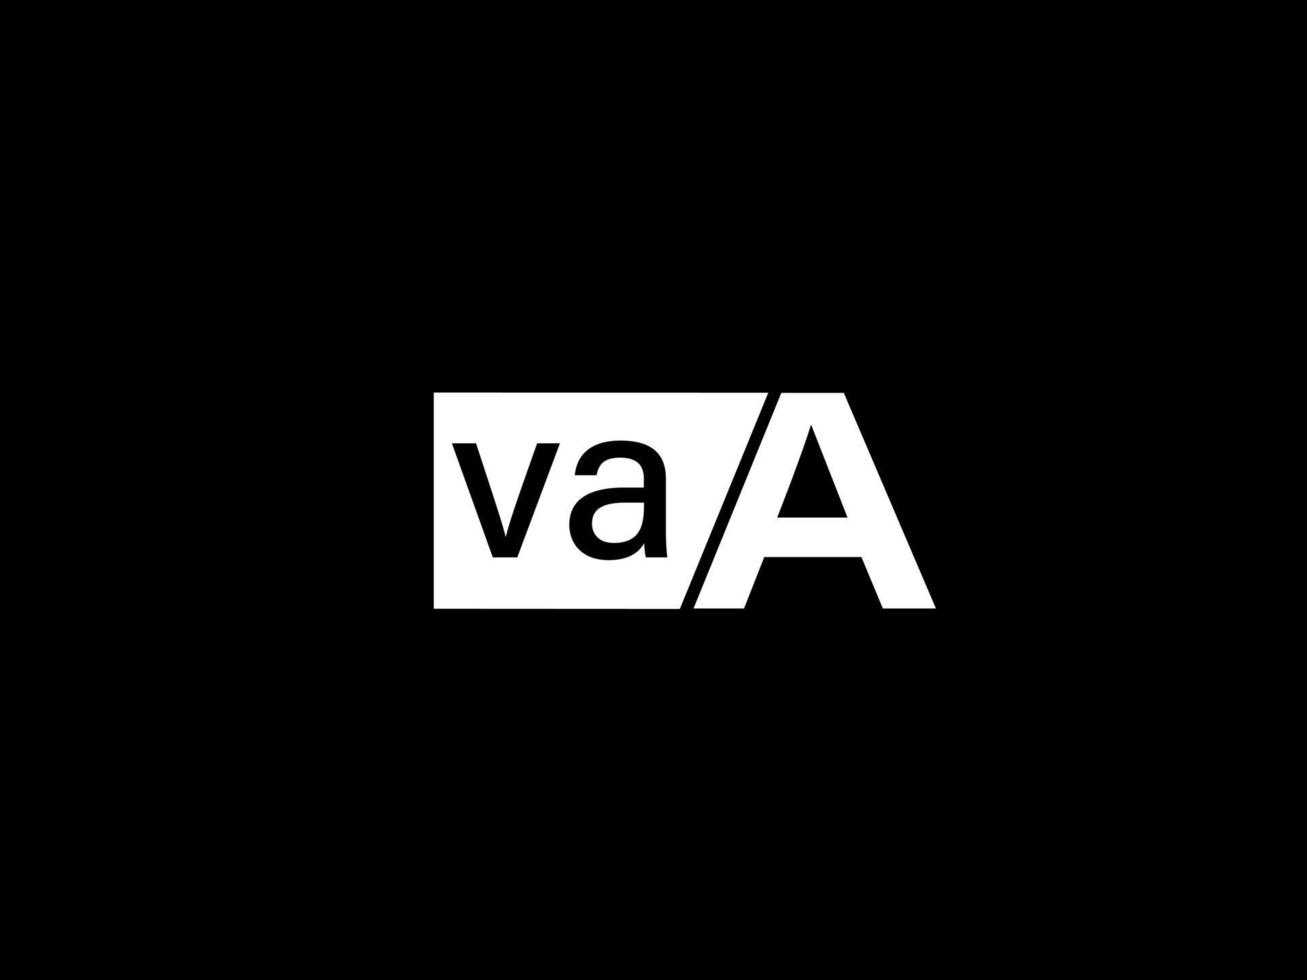 VAA Logo and Graphics design vector art, Icons isolated on black background